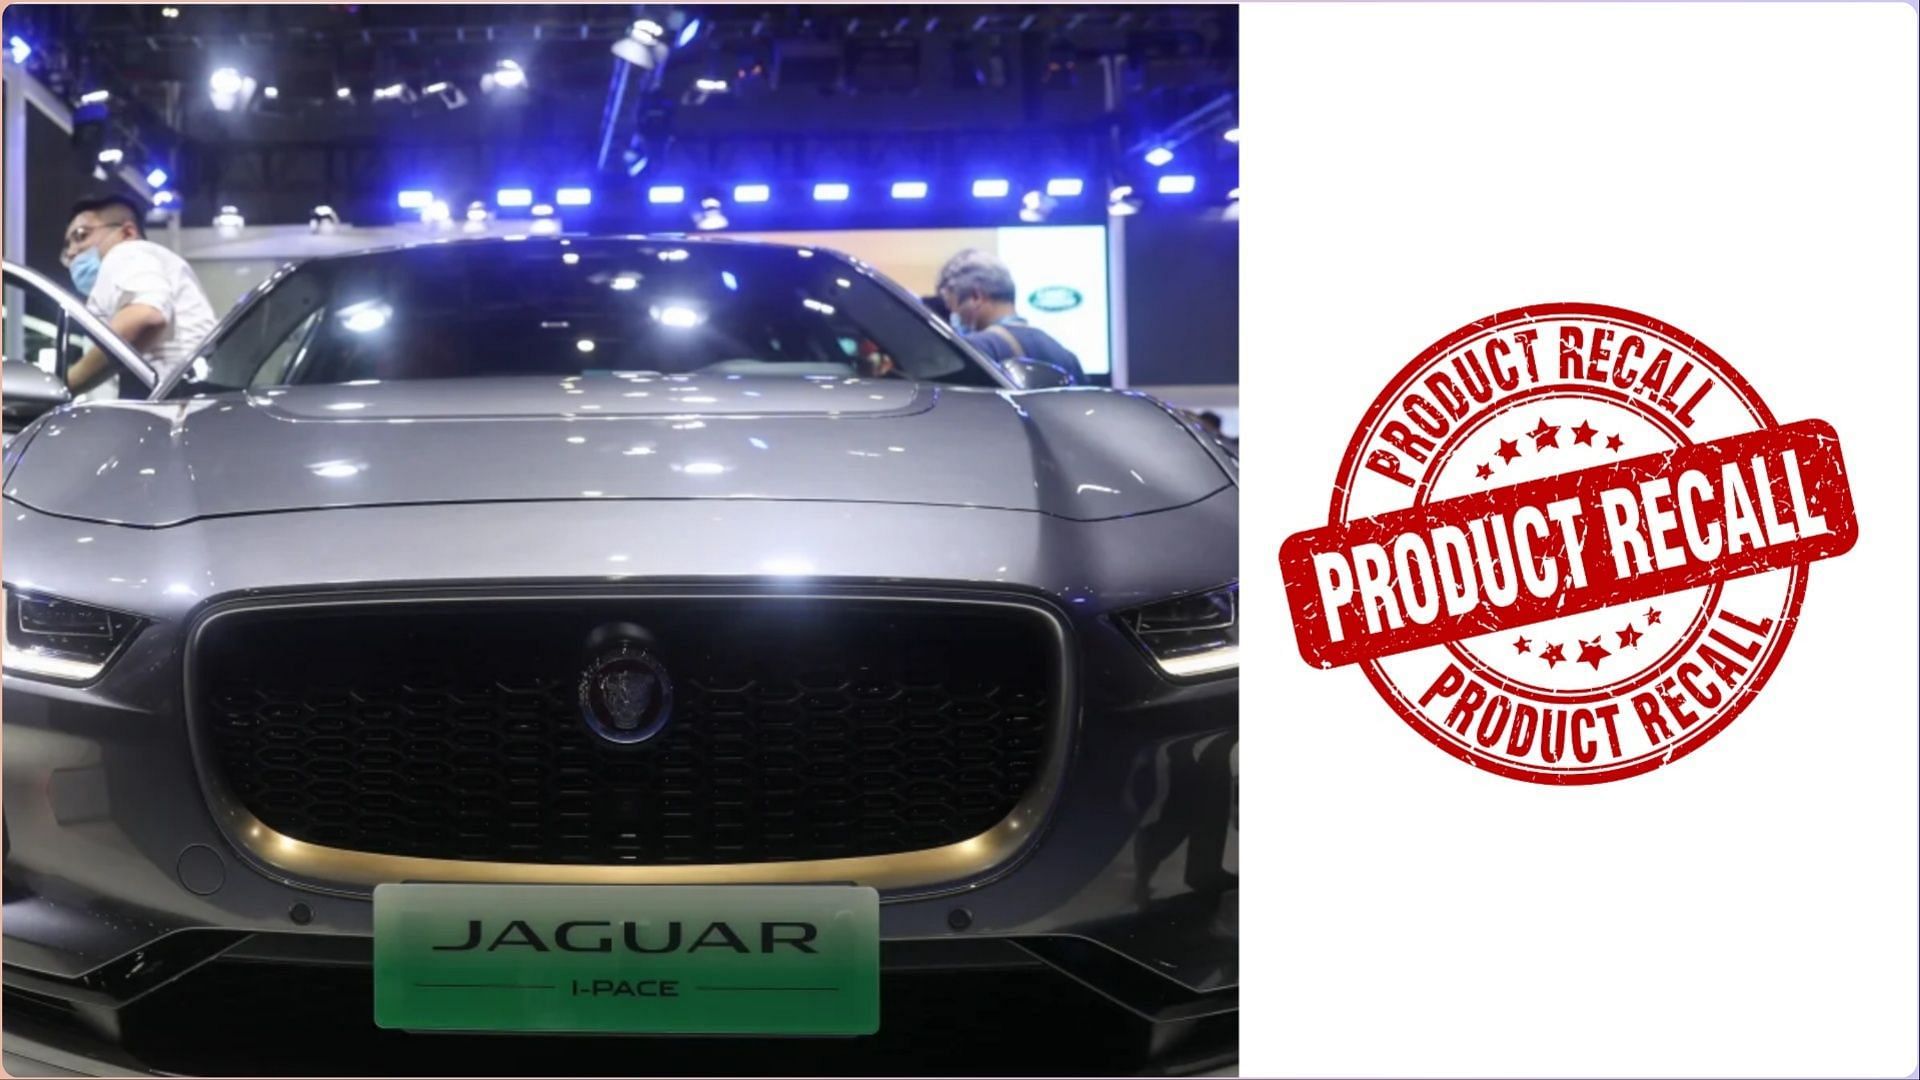 Jaguar Land Rover North America, LLC recalls I-PACE electric vehicles over fire hazard concerns (Image via Xinhua/Ding Ting/ Getty Images)